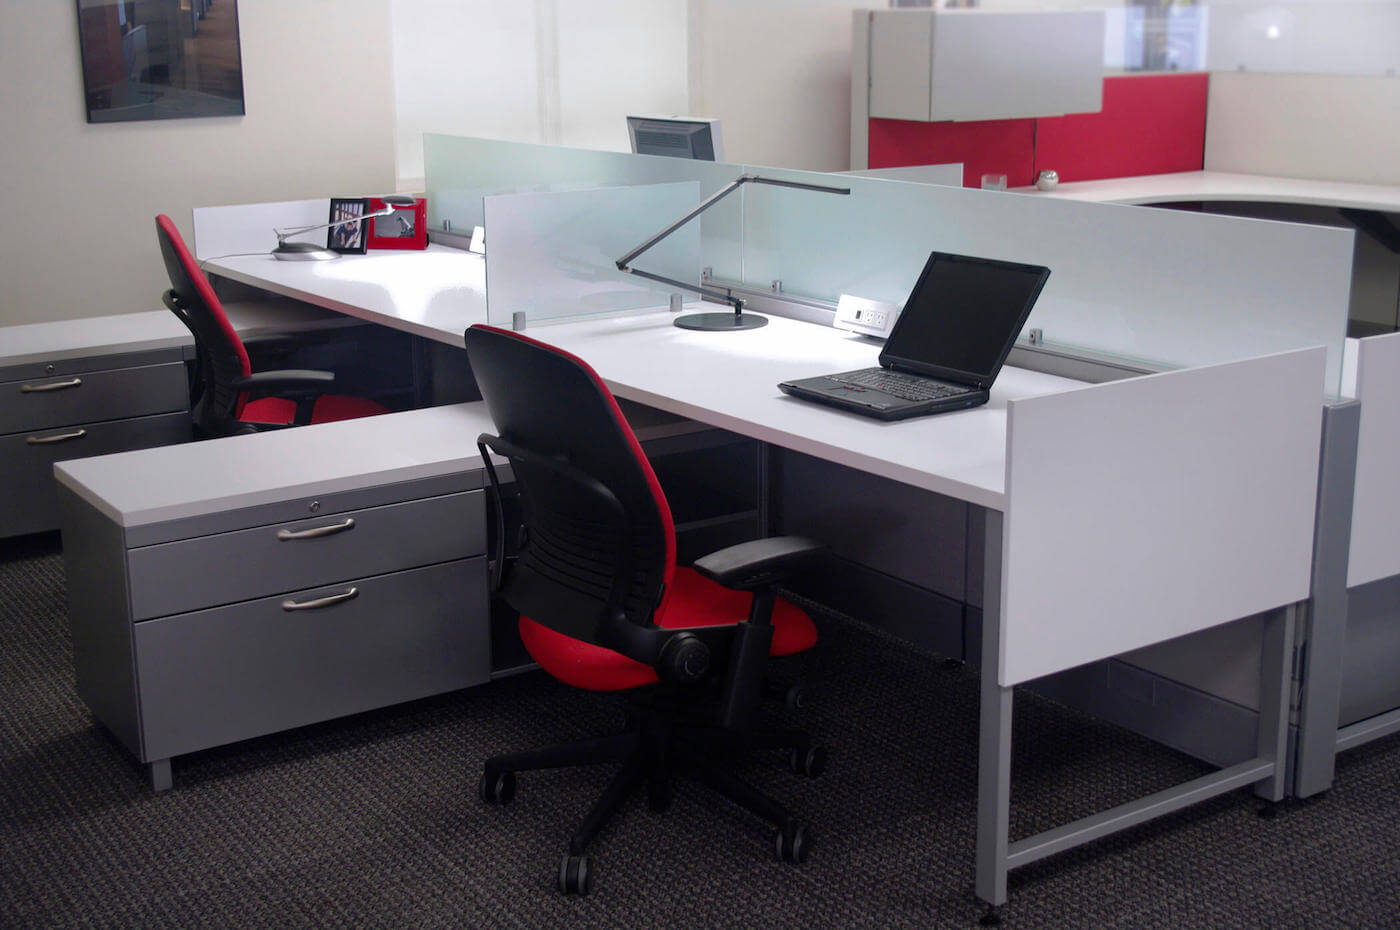 benching open plan office furniture systems